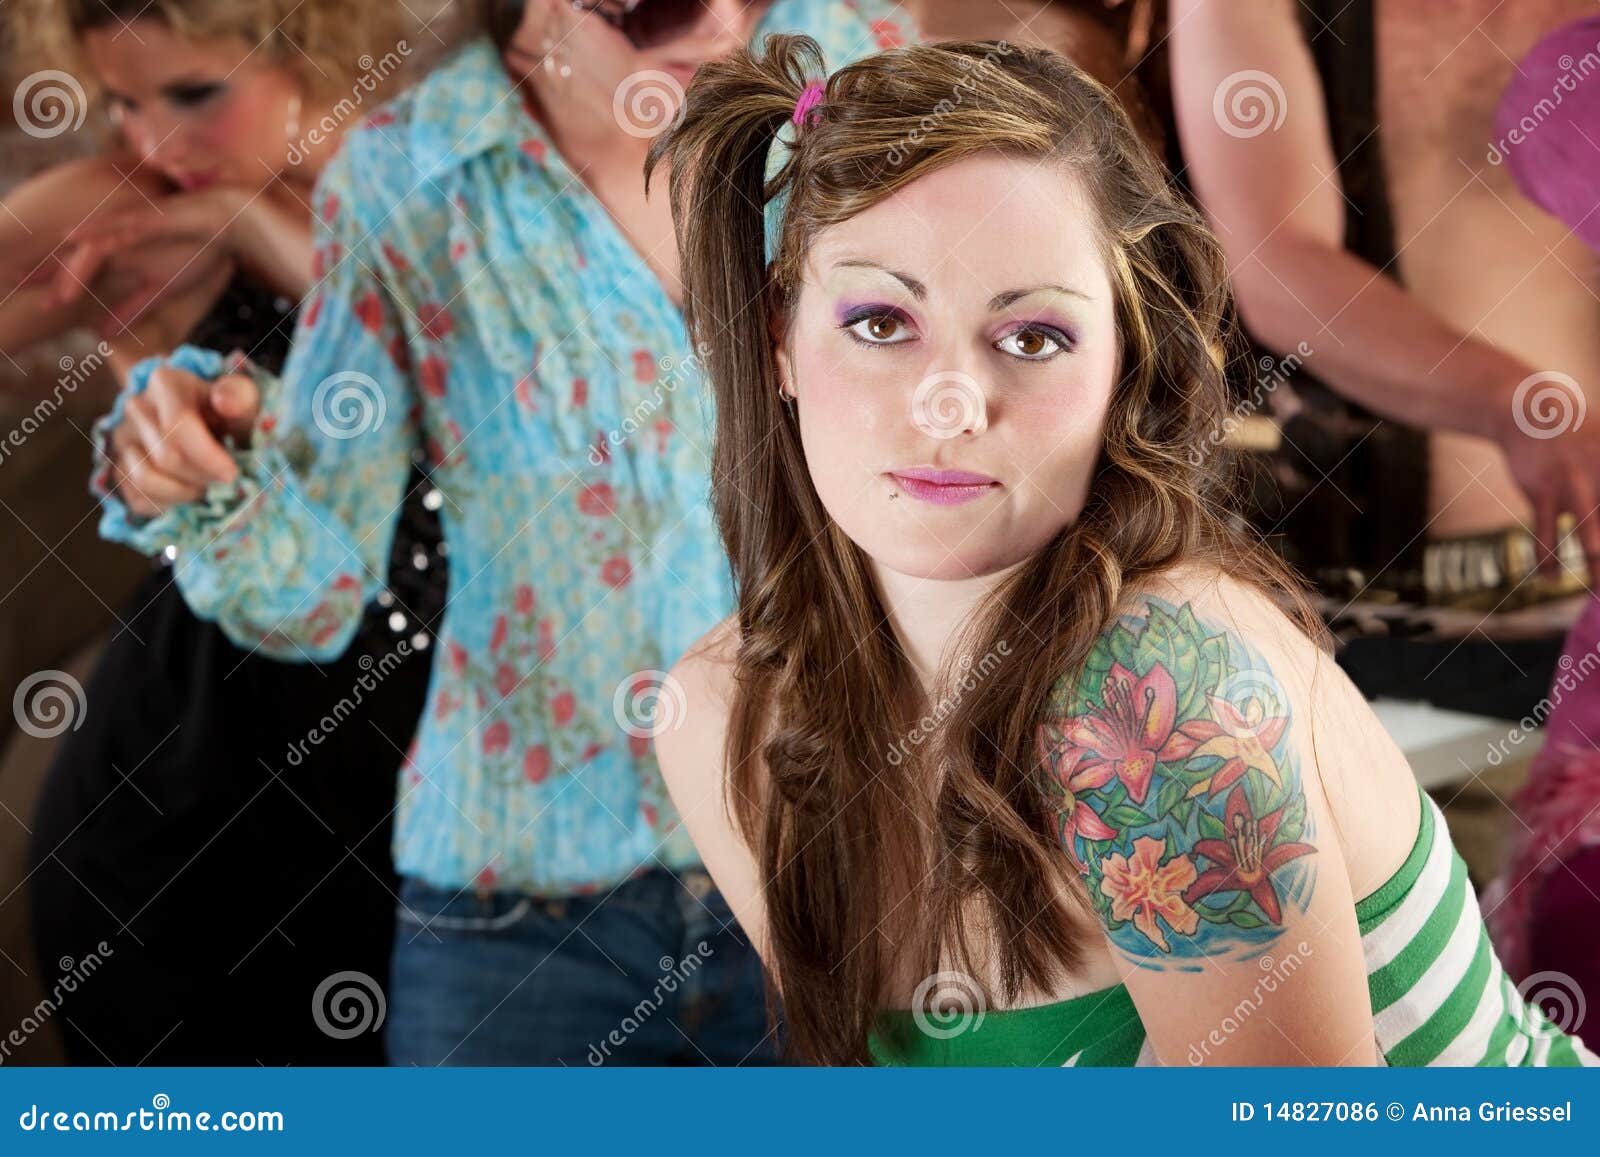 young woman at 1970s disco music party